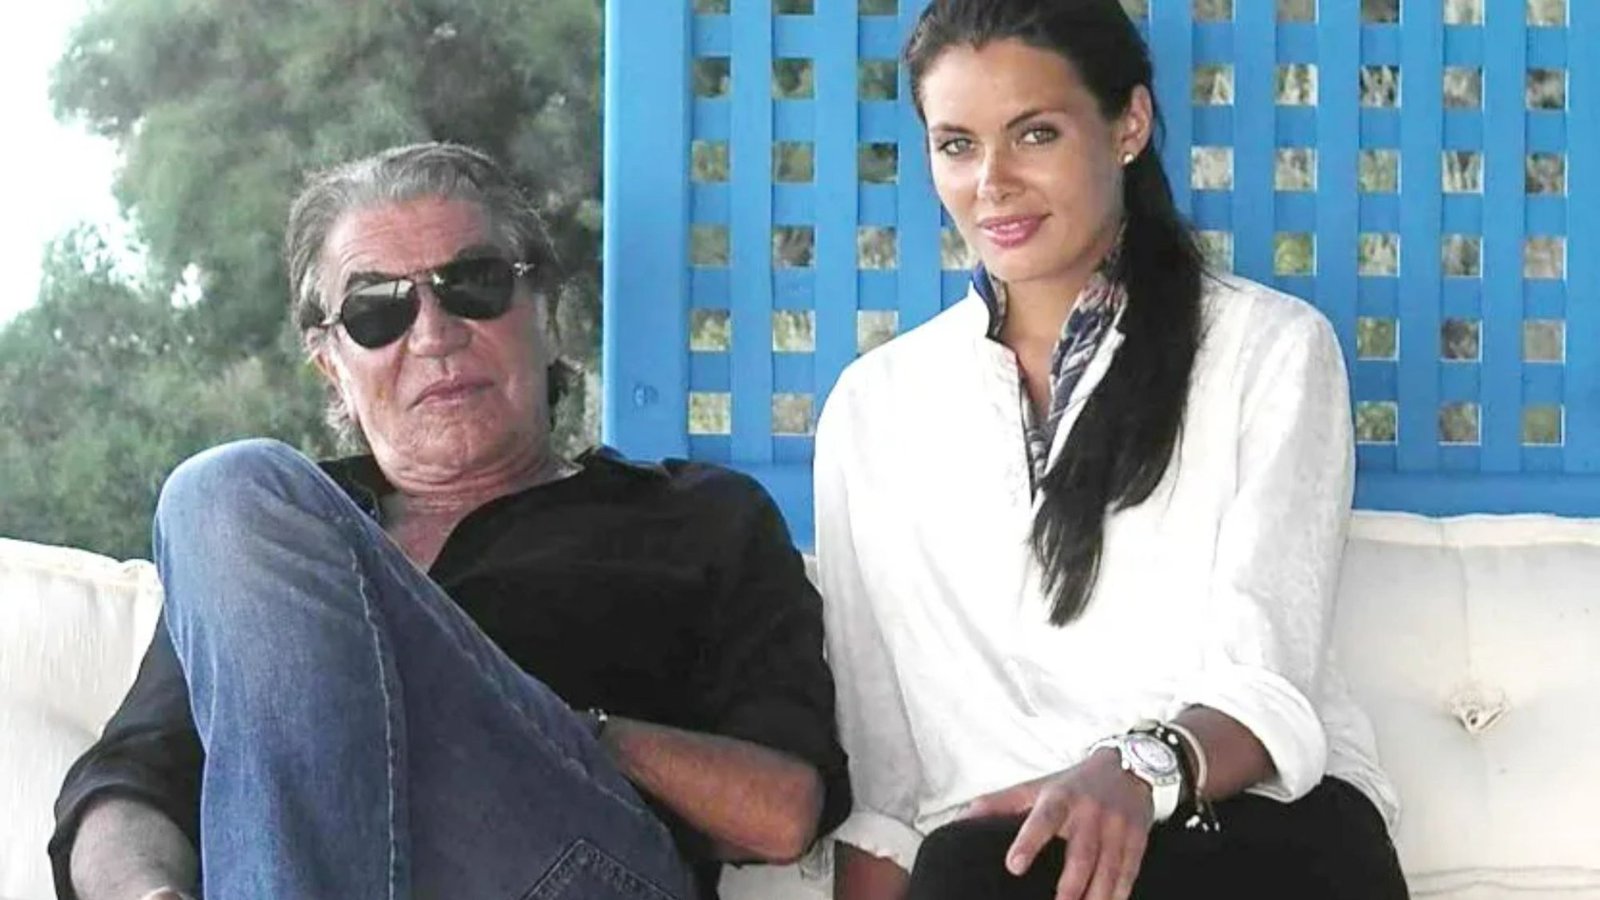 Roberto Cavalli’s turbulent love life saw fashion icon divorced TWICE before finding love again with Playboy model